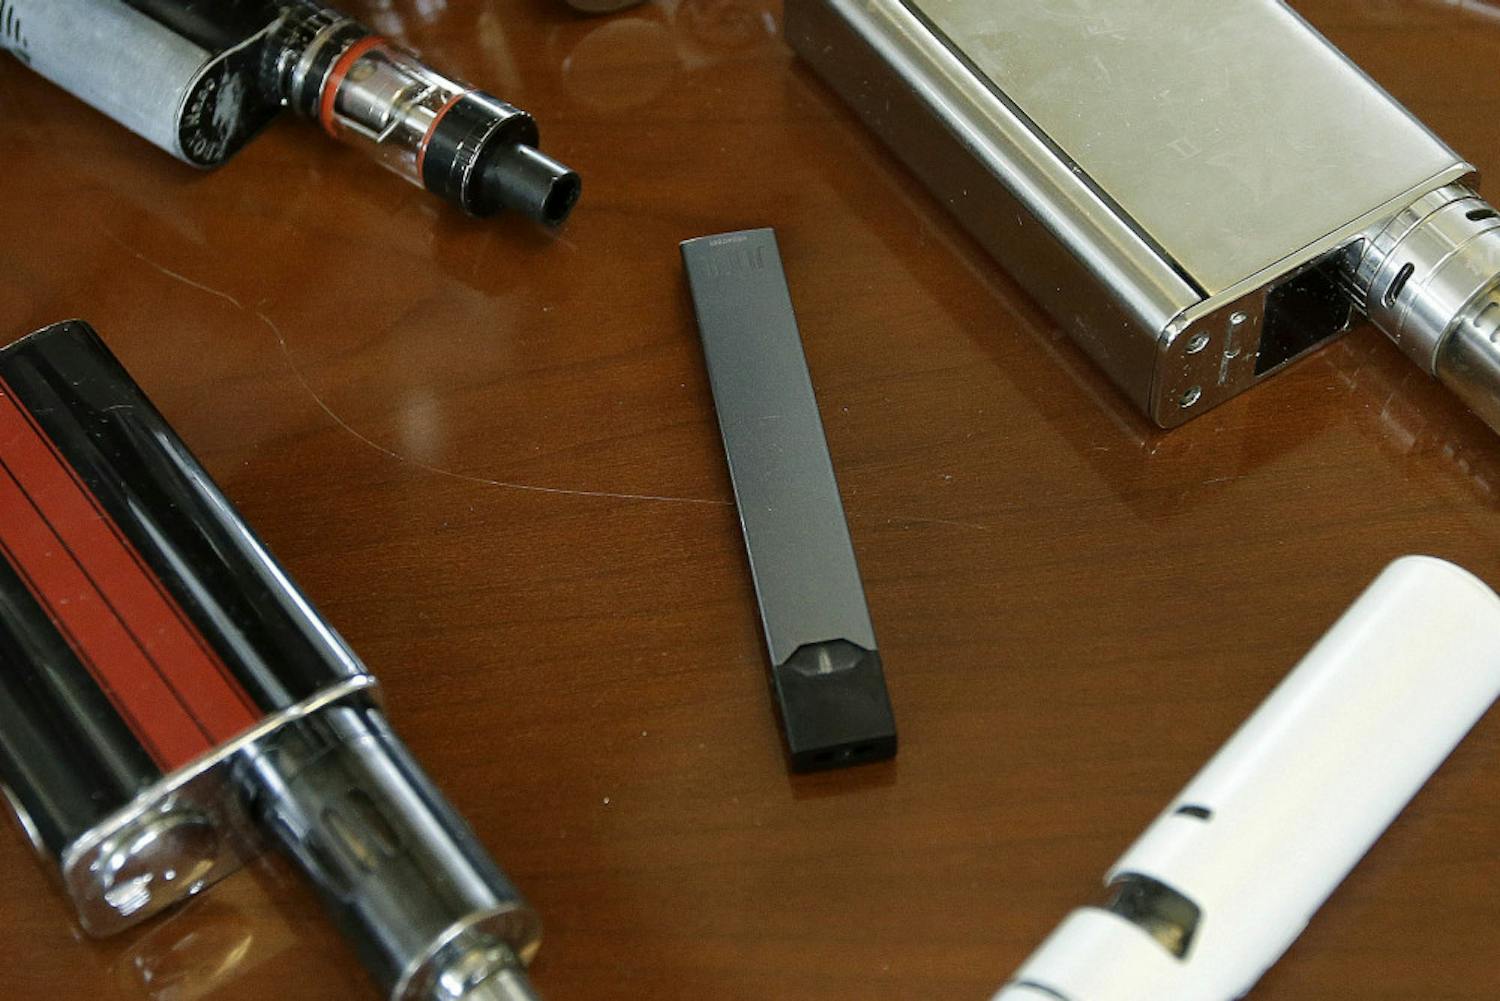 This Tuesday, April 10, 2018 file photo shows vaping devices, including a Juul, center, that were confiscated from students at a high school in Marshfield, Mass. On Tuesday, Nov. 13, 2018, San Francisco-based Juul Labs Inc. announced it had stopped filling orders for its mango, fruit, creme and cucumber pods but not menthol and mint. It will sell all flavors through its website and limit sales to those 21 and older. (AP Photo/Steven Senne)